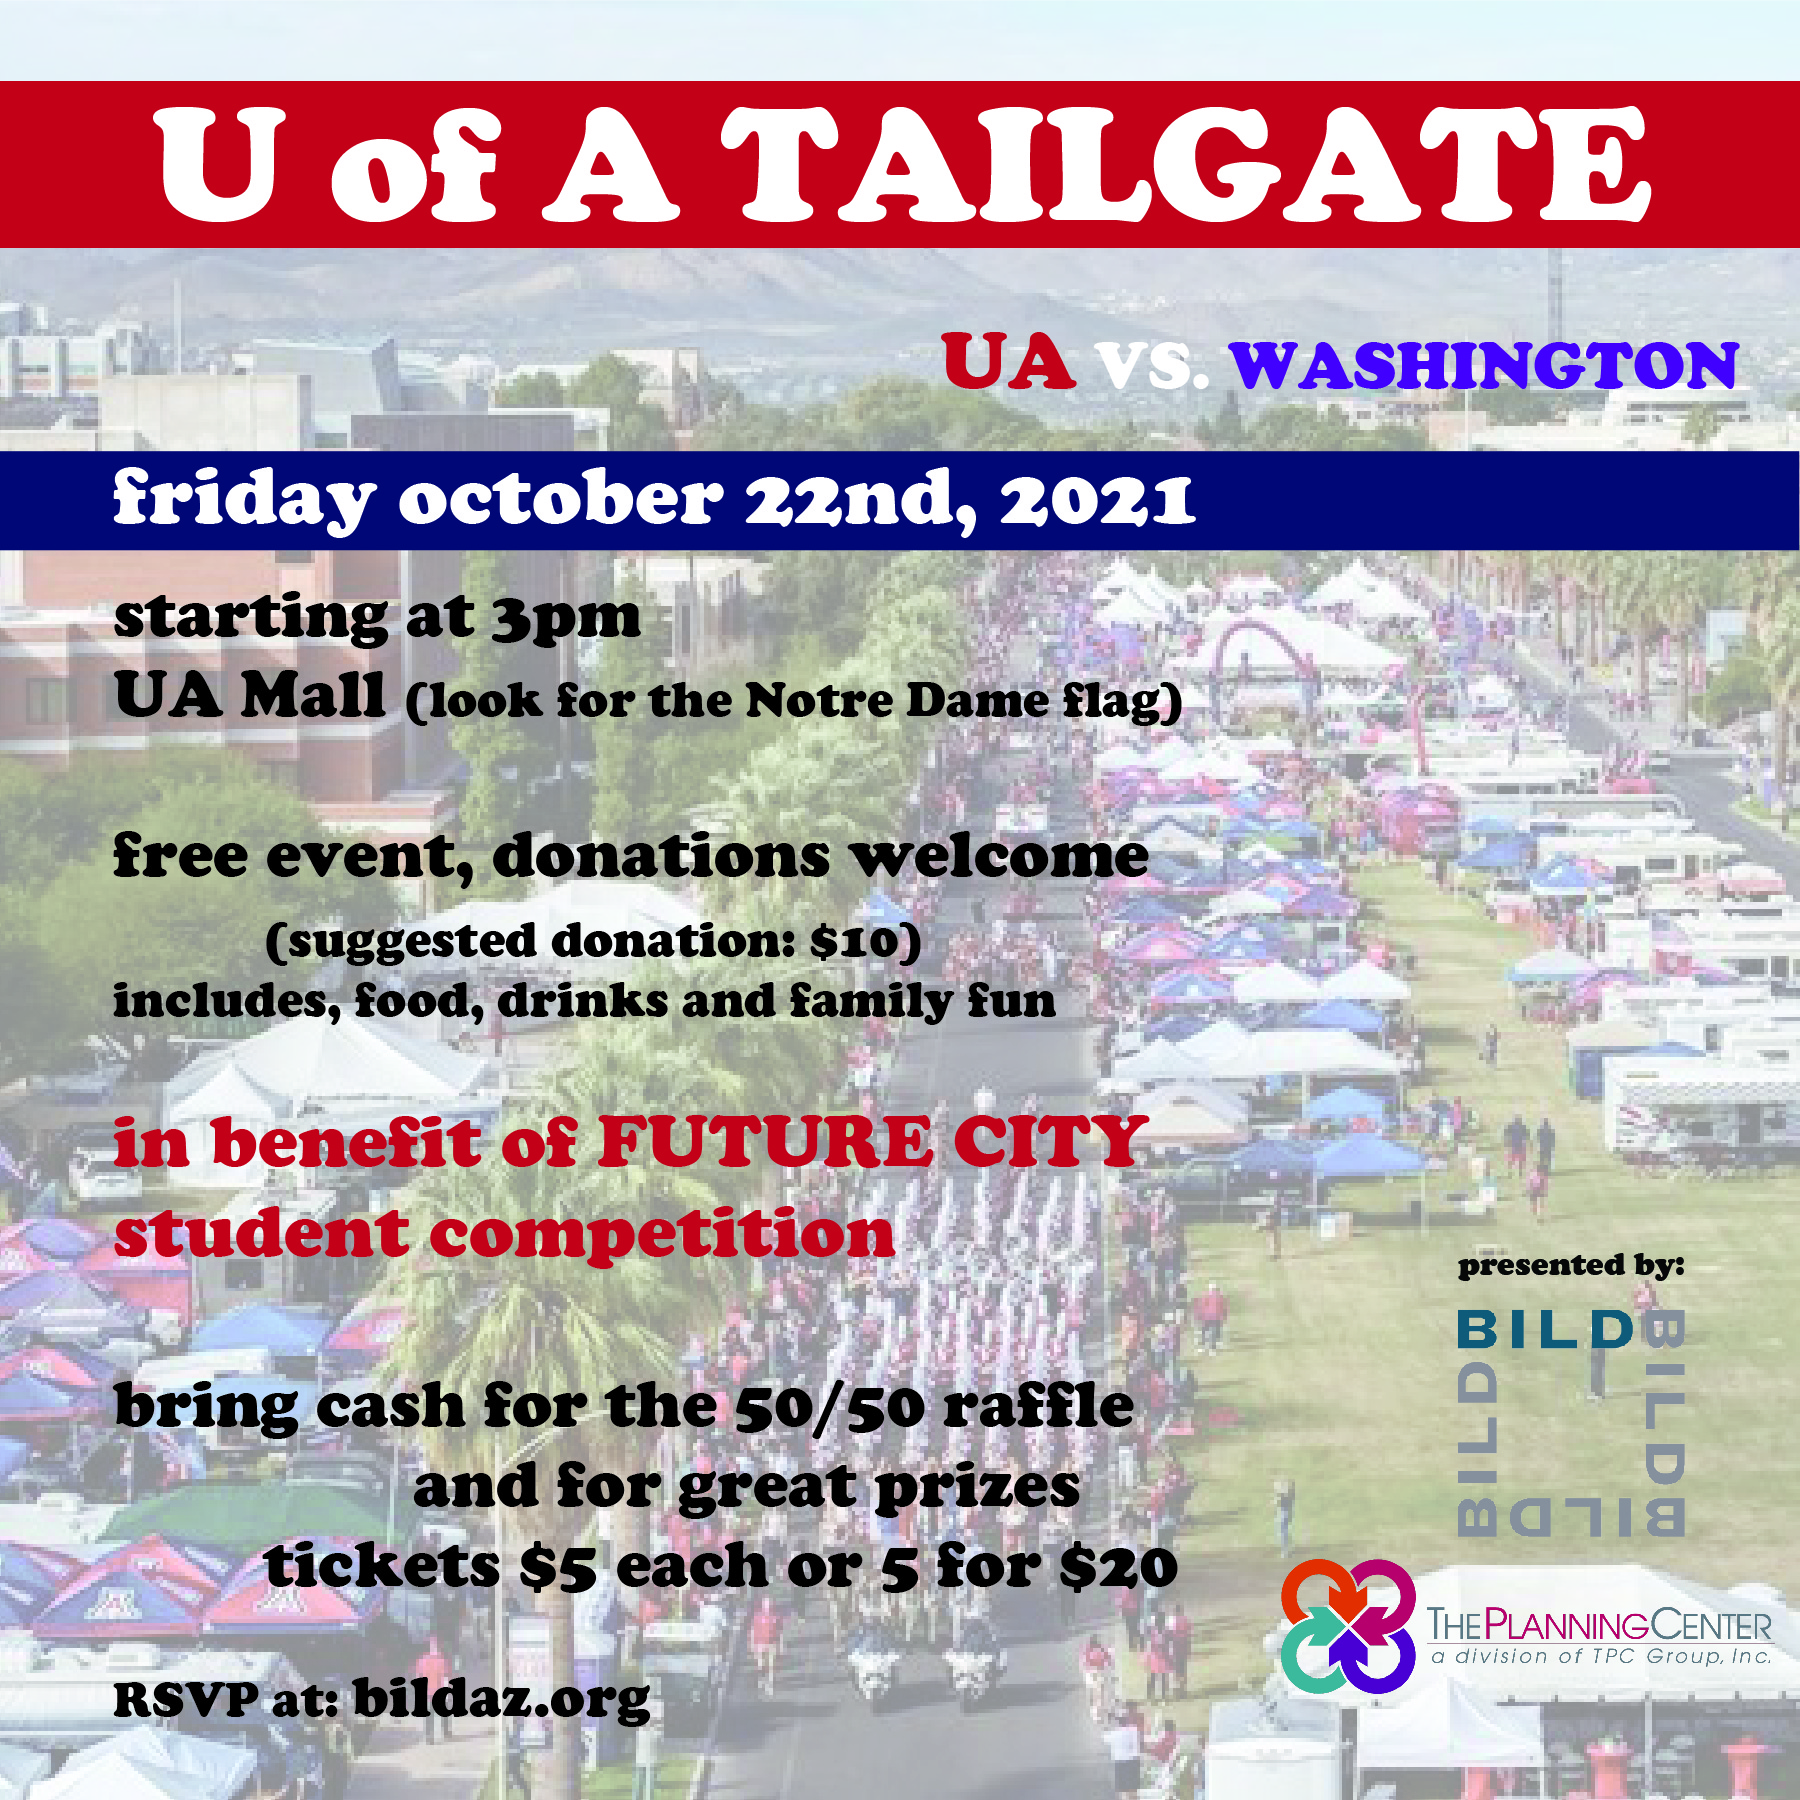 Join BILD for a Tailgate Event!